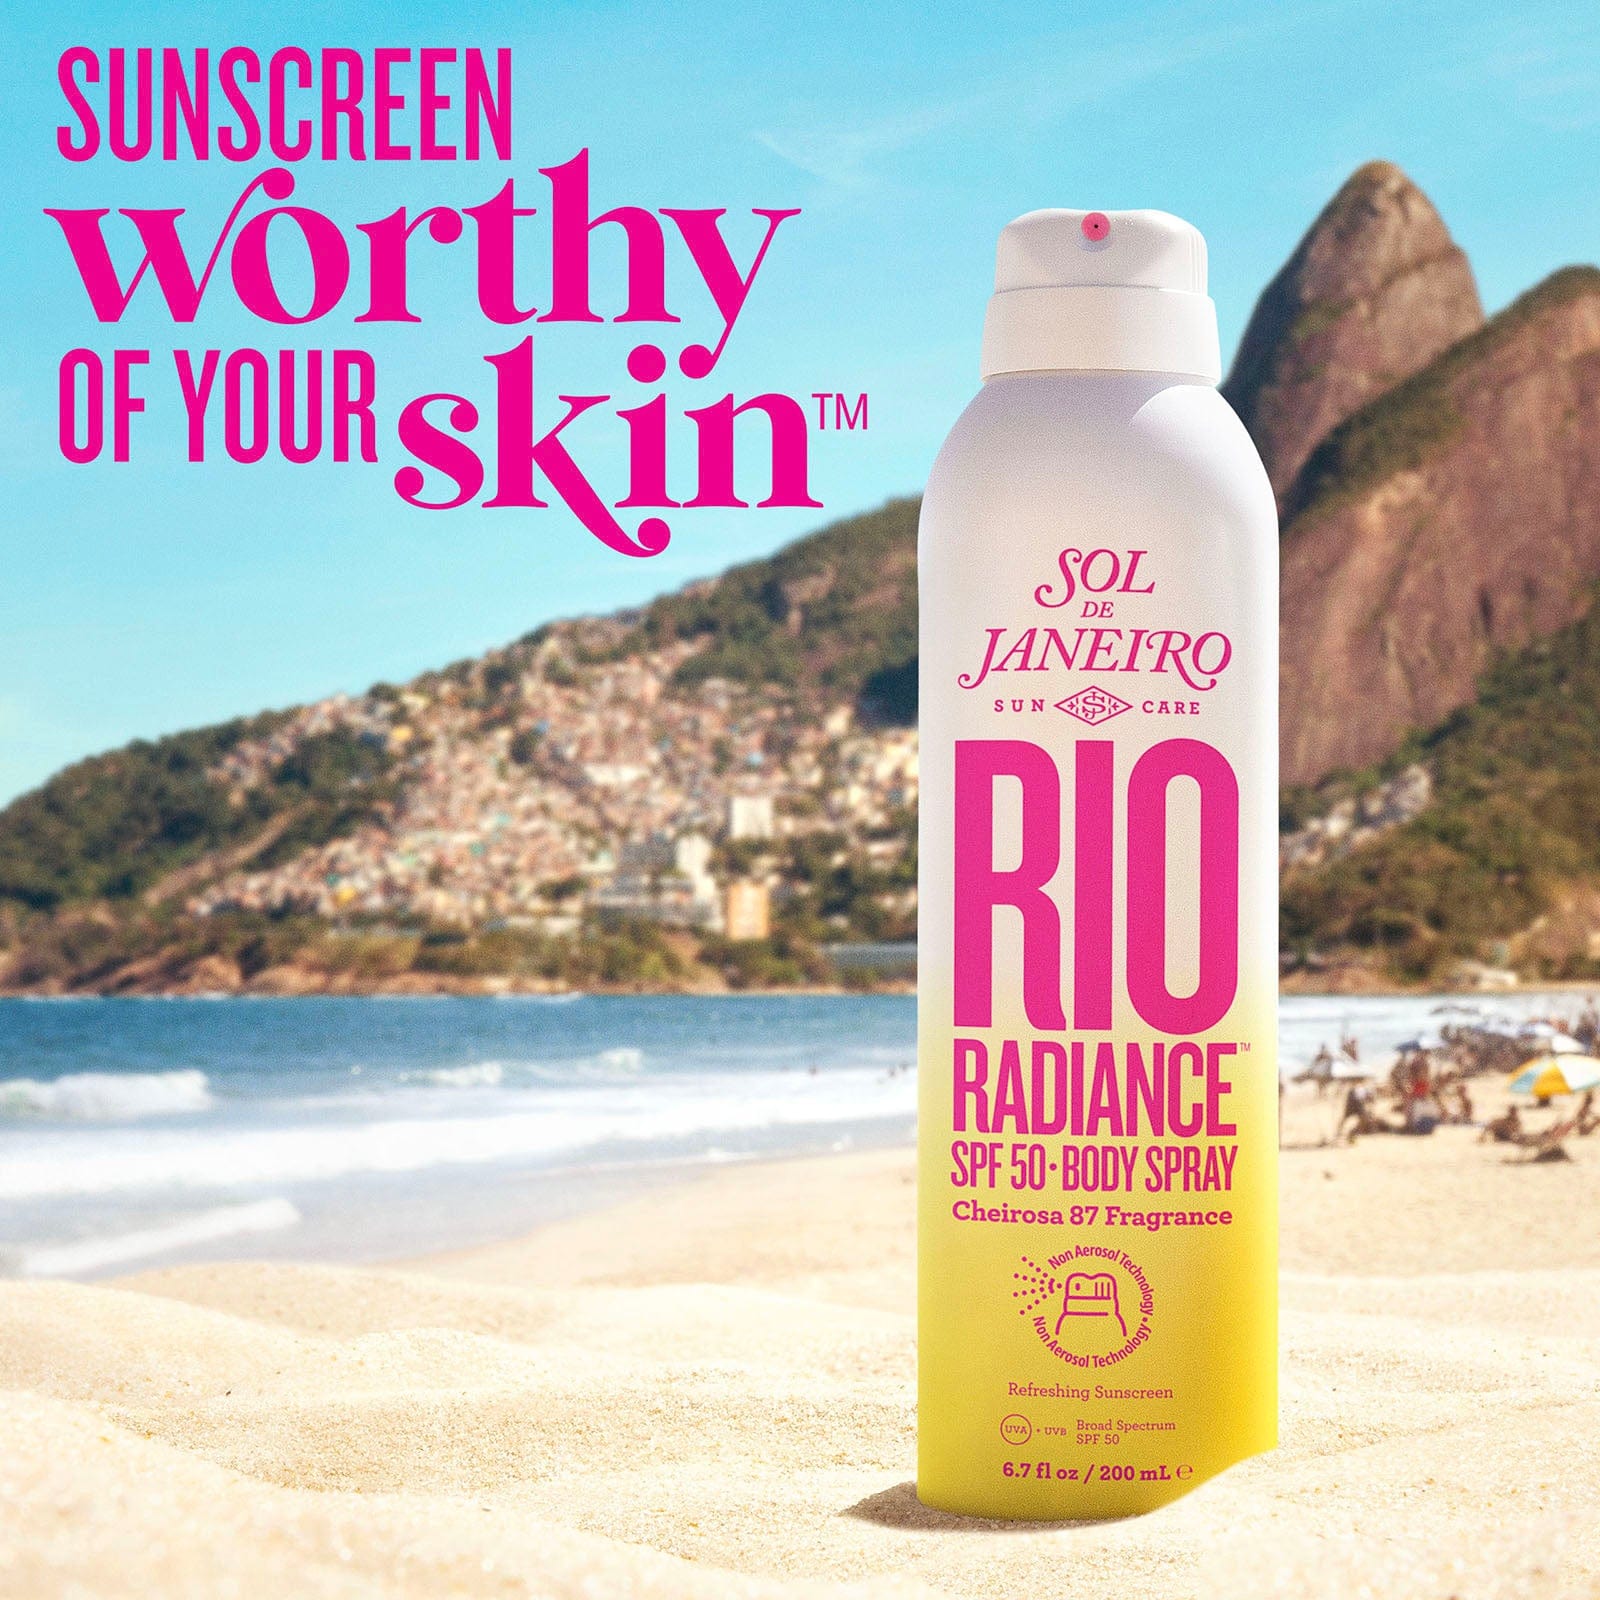 Sunscreen worthy of your skin 